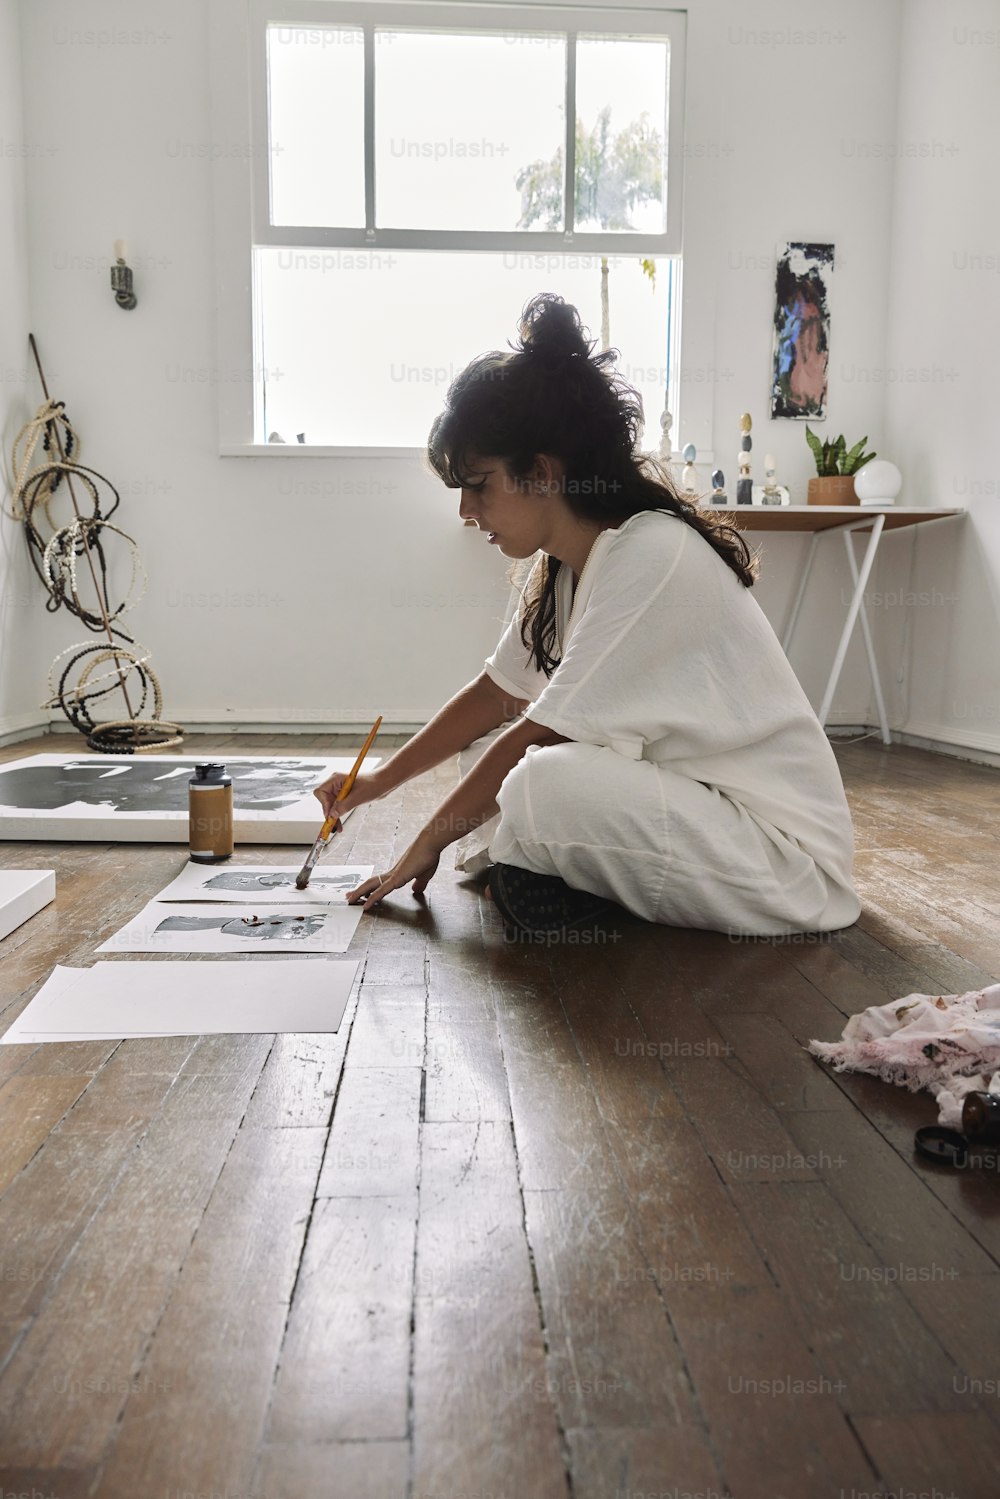 a woman sitting on the floor drawing on a piece of paper